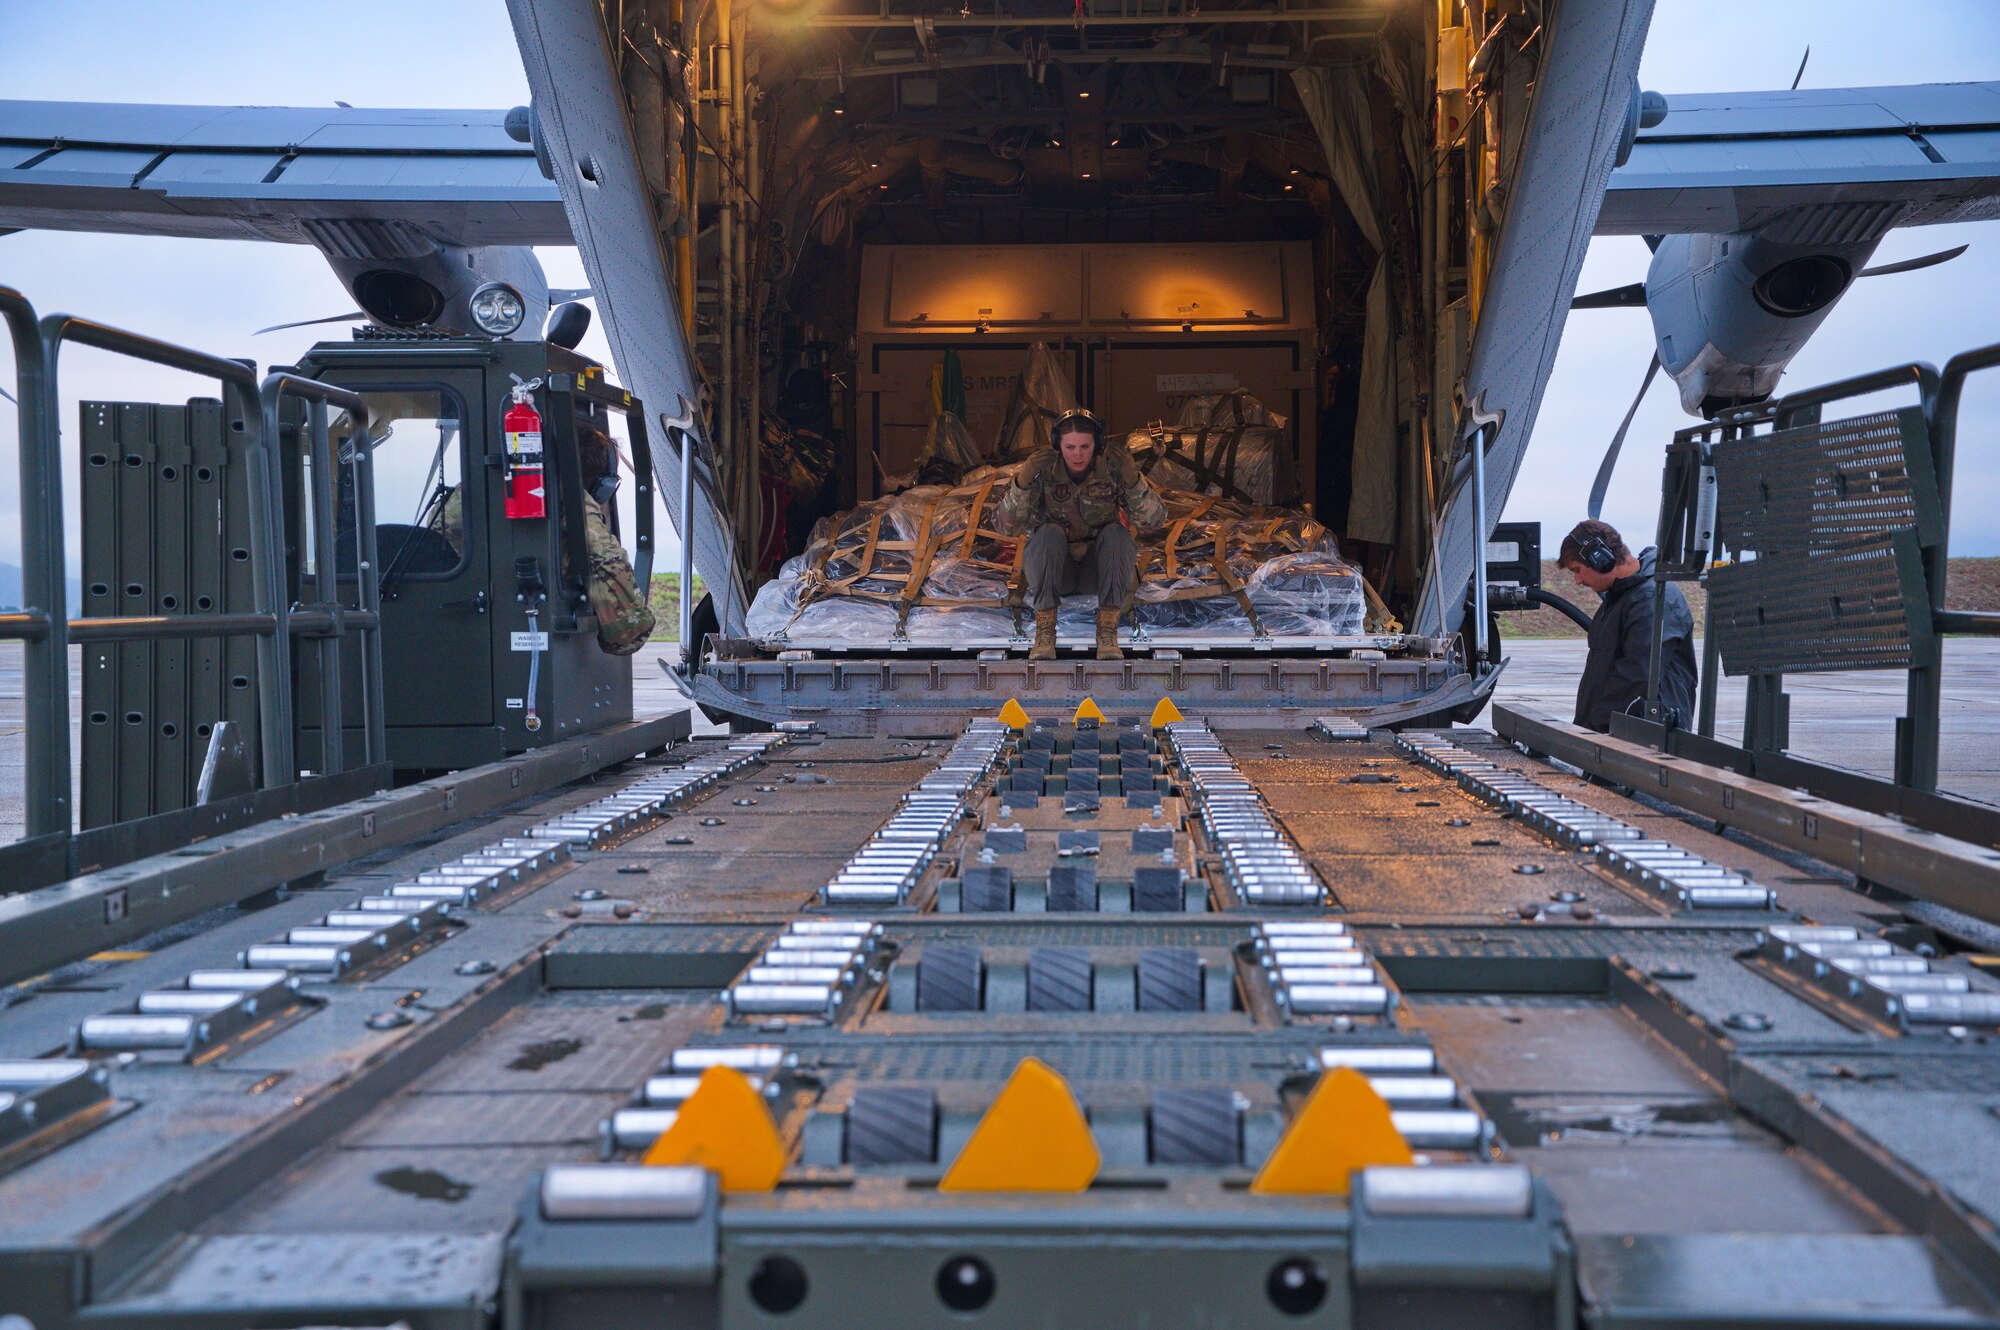 U.S. Air Force Tech. Sgt. Alex White, 37th Airlift Squadron instructor loadmaster, directs the placement of a material handling equipment loader during Operation Castle Forge at Larissa Air Base, Greece, Oct. 15, 2021. Castle Forge is a U.S. Air Forces Europe-Air Forces Africa-led joint, multinational training event designed to raise and strengthen the U.S.' commitment to the Black Sea allies and partnerships while also demonstrating rapid, forward deployed support to the U.S European Command area of responsibility. (U.S. Air Force photo by Senior Airman Branden Rae)